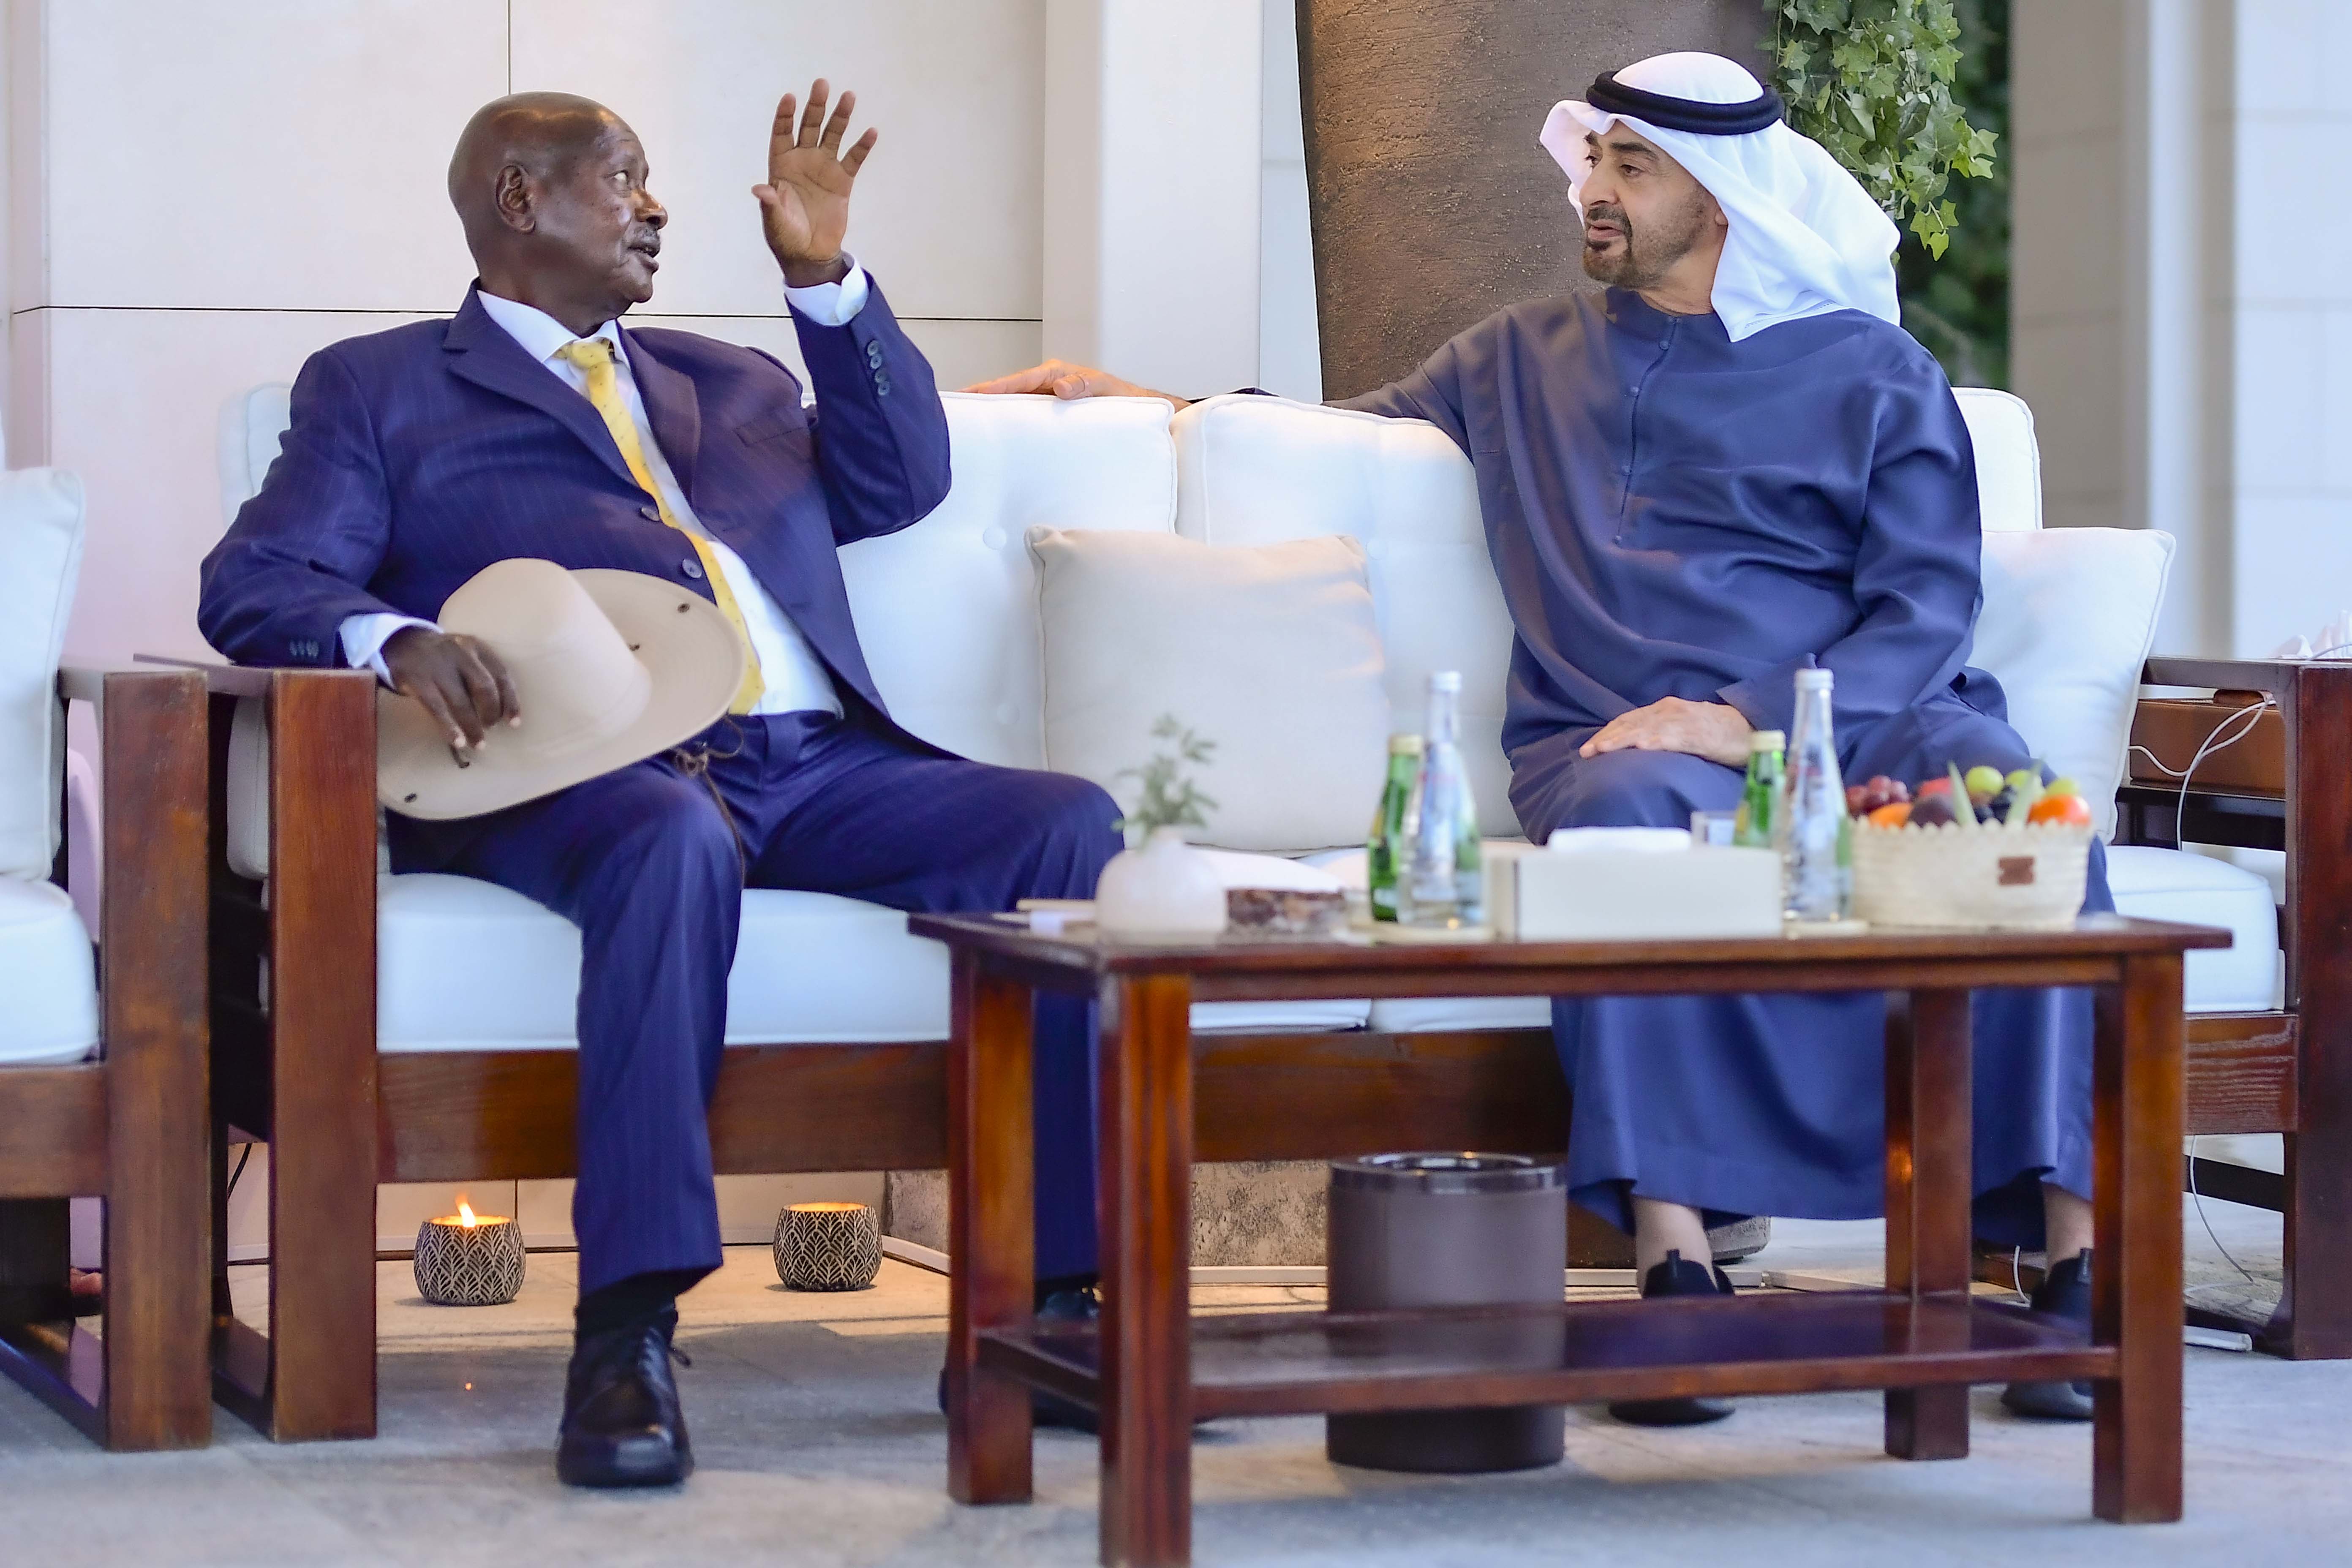 UAE Ruler accepts an invitation from Museveni for January NAM conference in Kampala